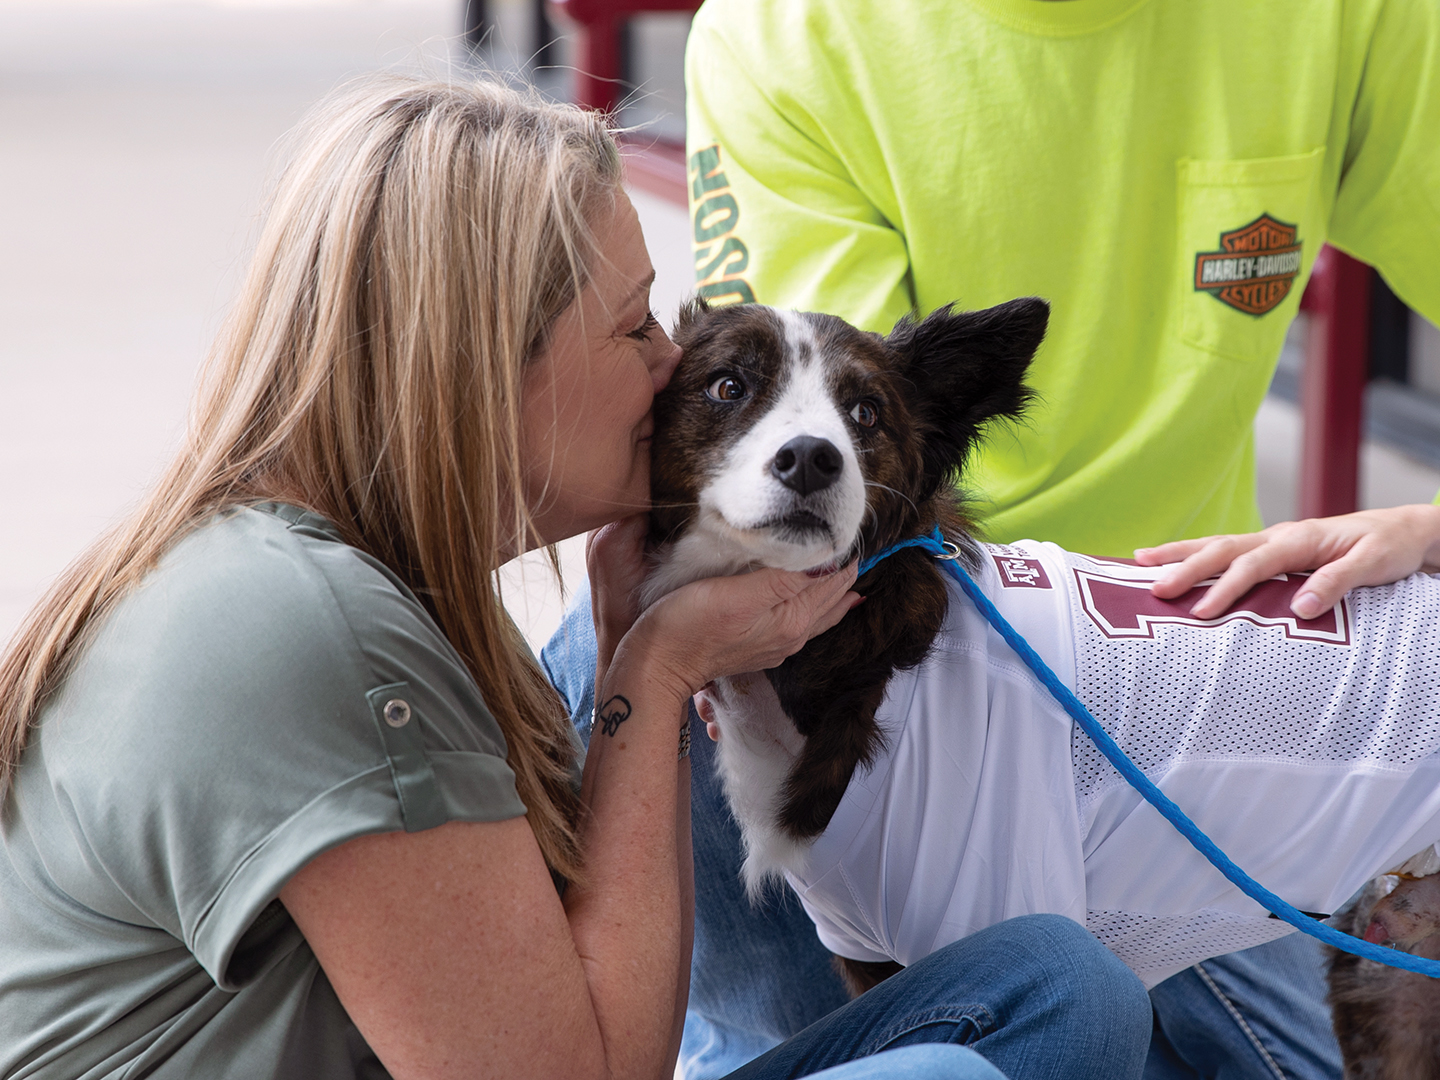 Texas A&M Small Animal Hospital Saves Lucky Dog After Car Accident